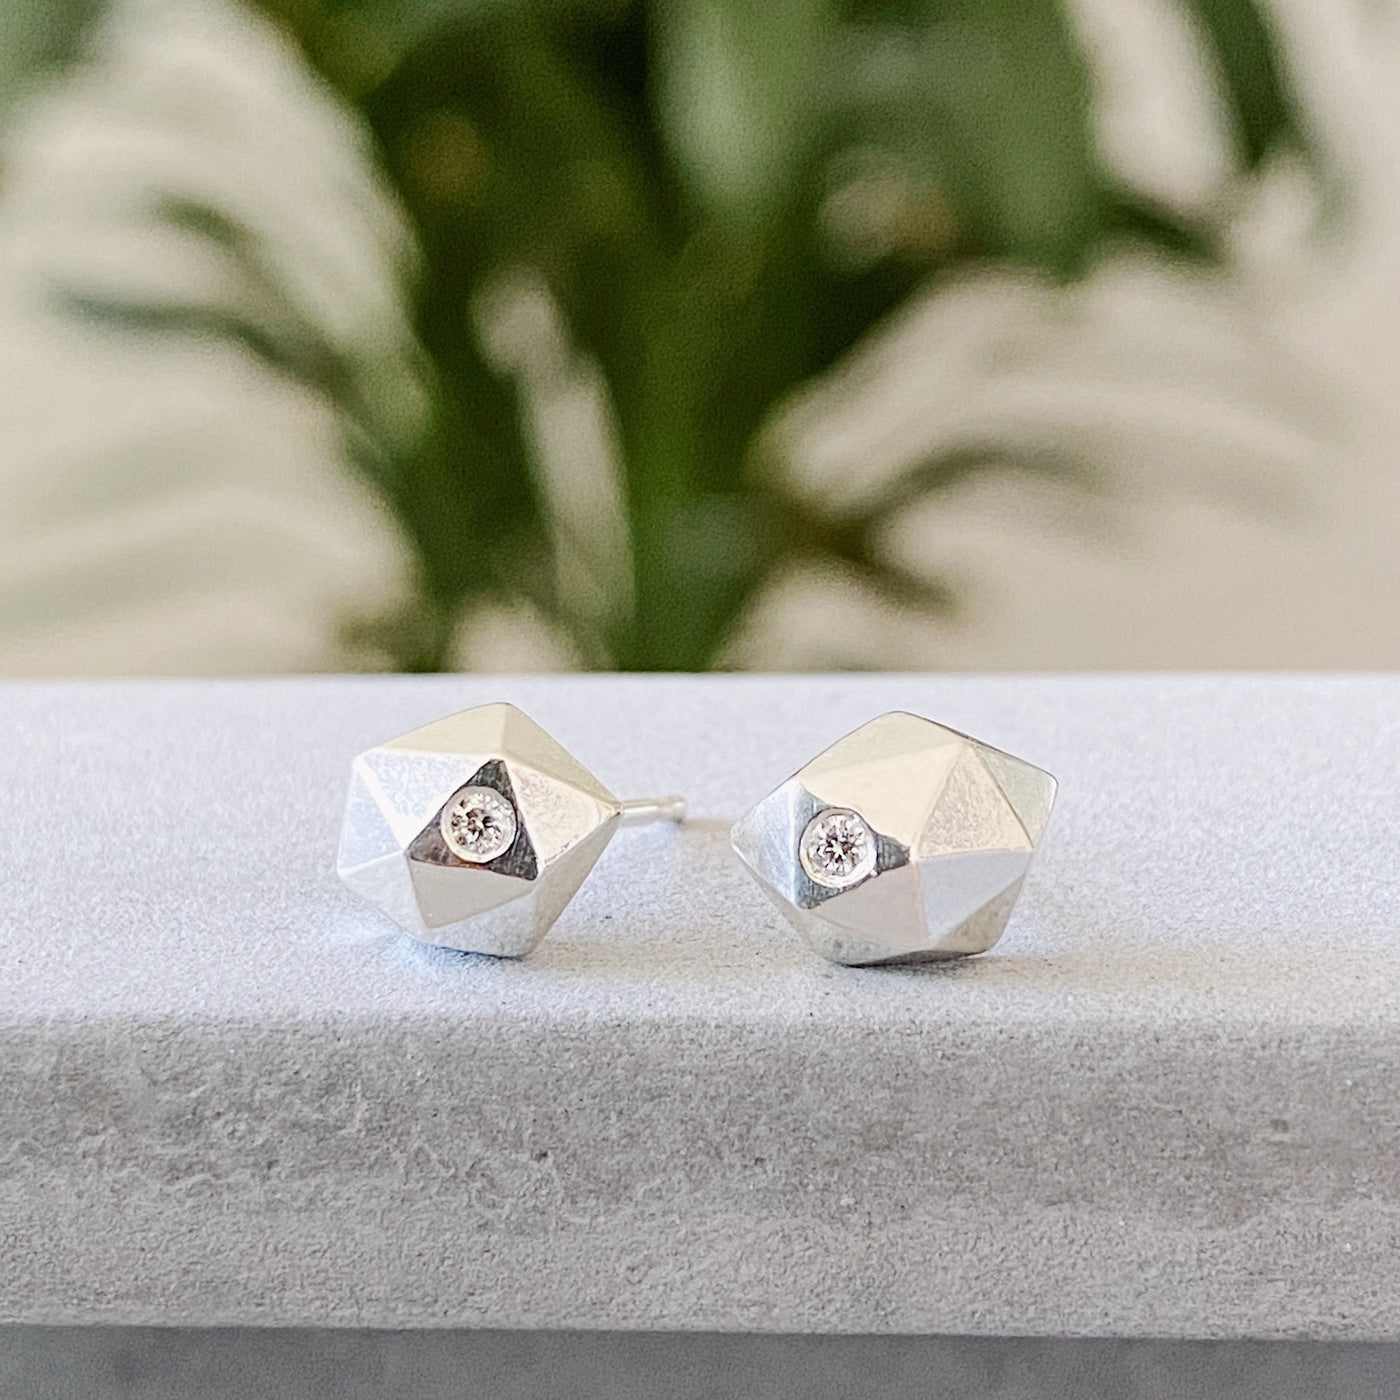 Sterling silver wabi-sabi faceted geometric stud earrings with two flush set diamonds by Corey Egan on concrete